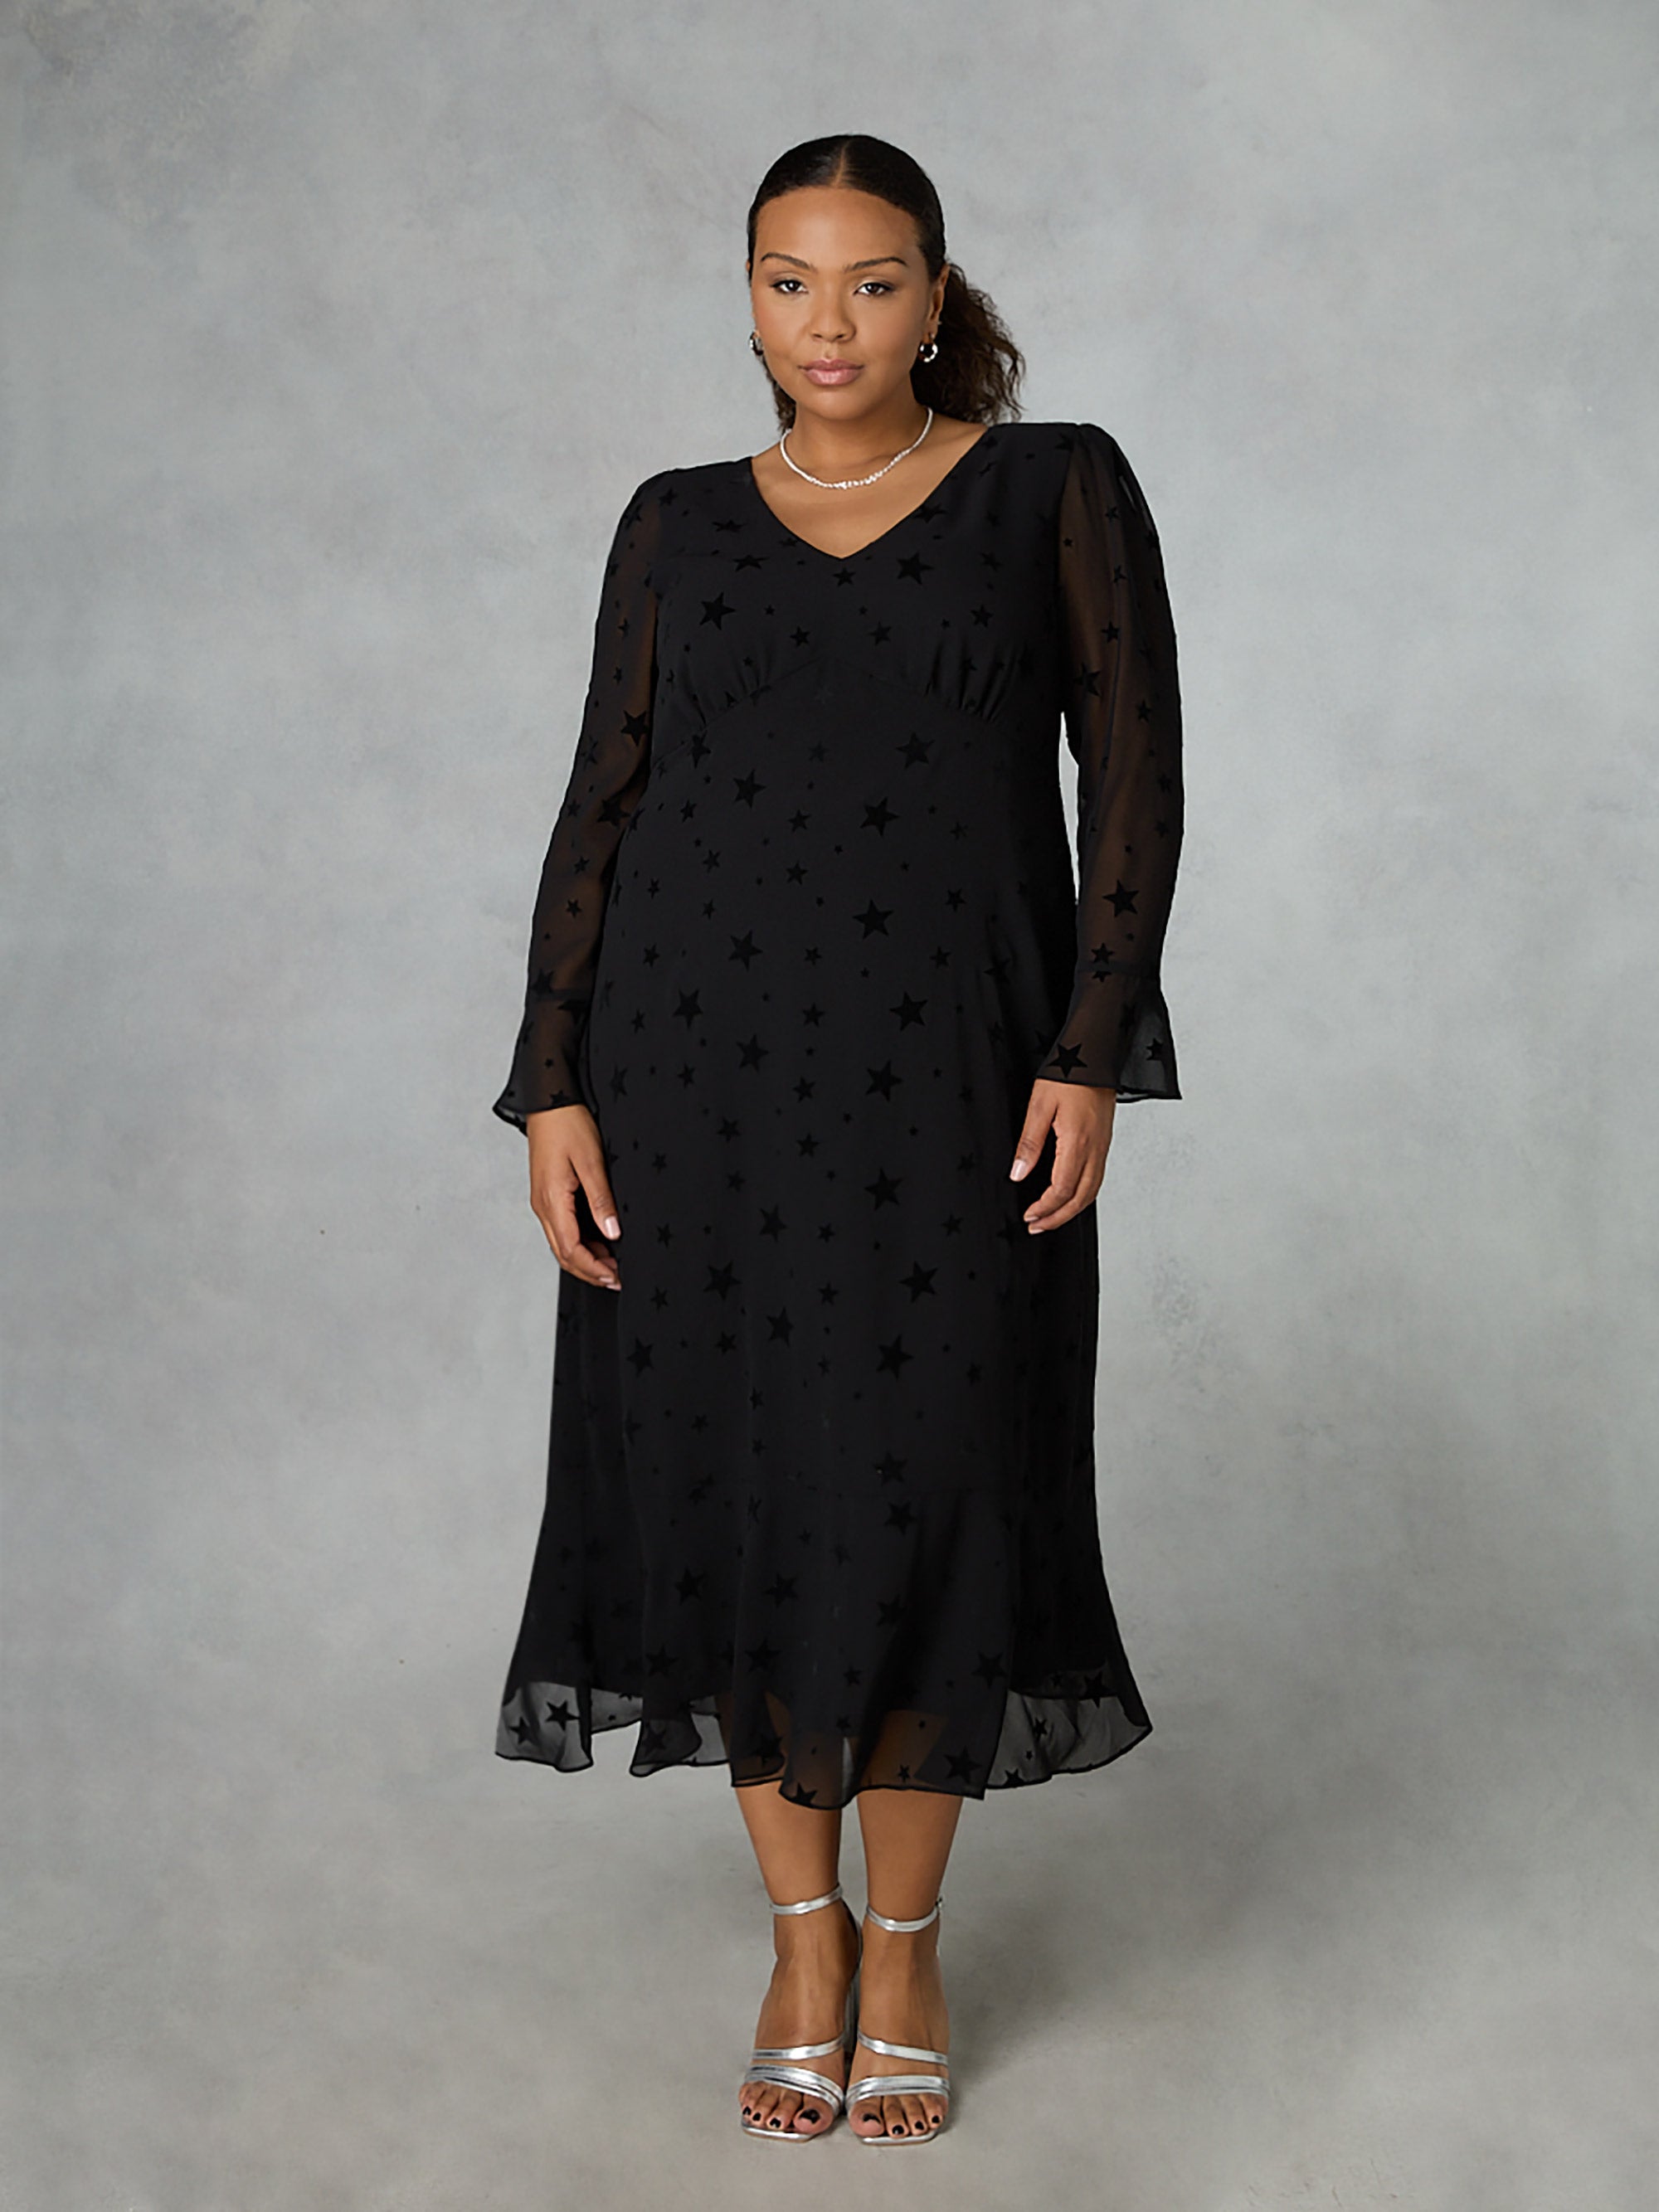 Black Feather Trim Dress - Plus Size Clothing from Live Unlimited